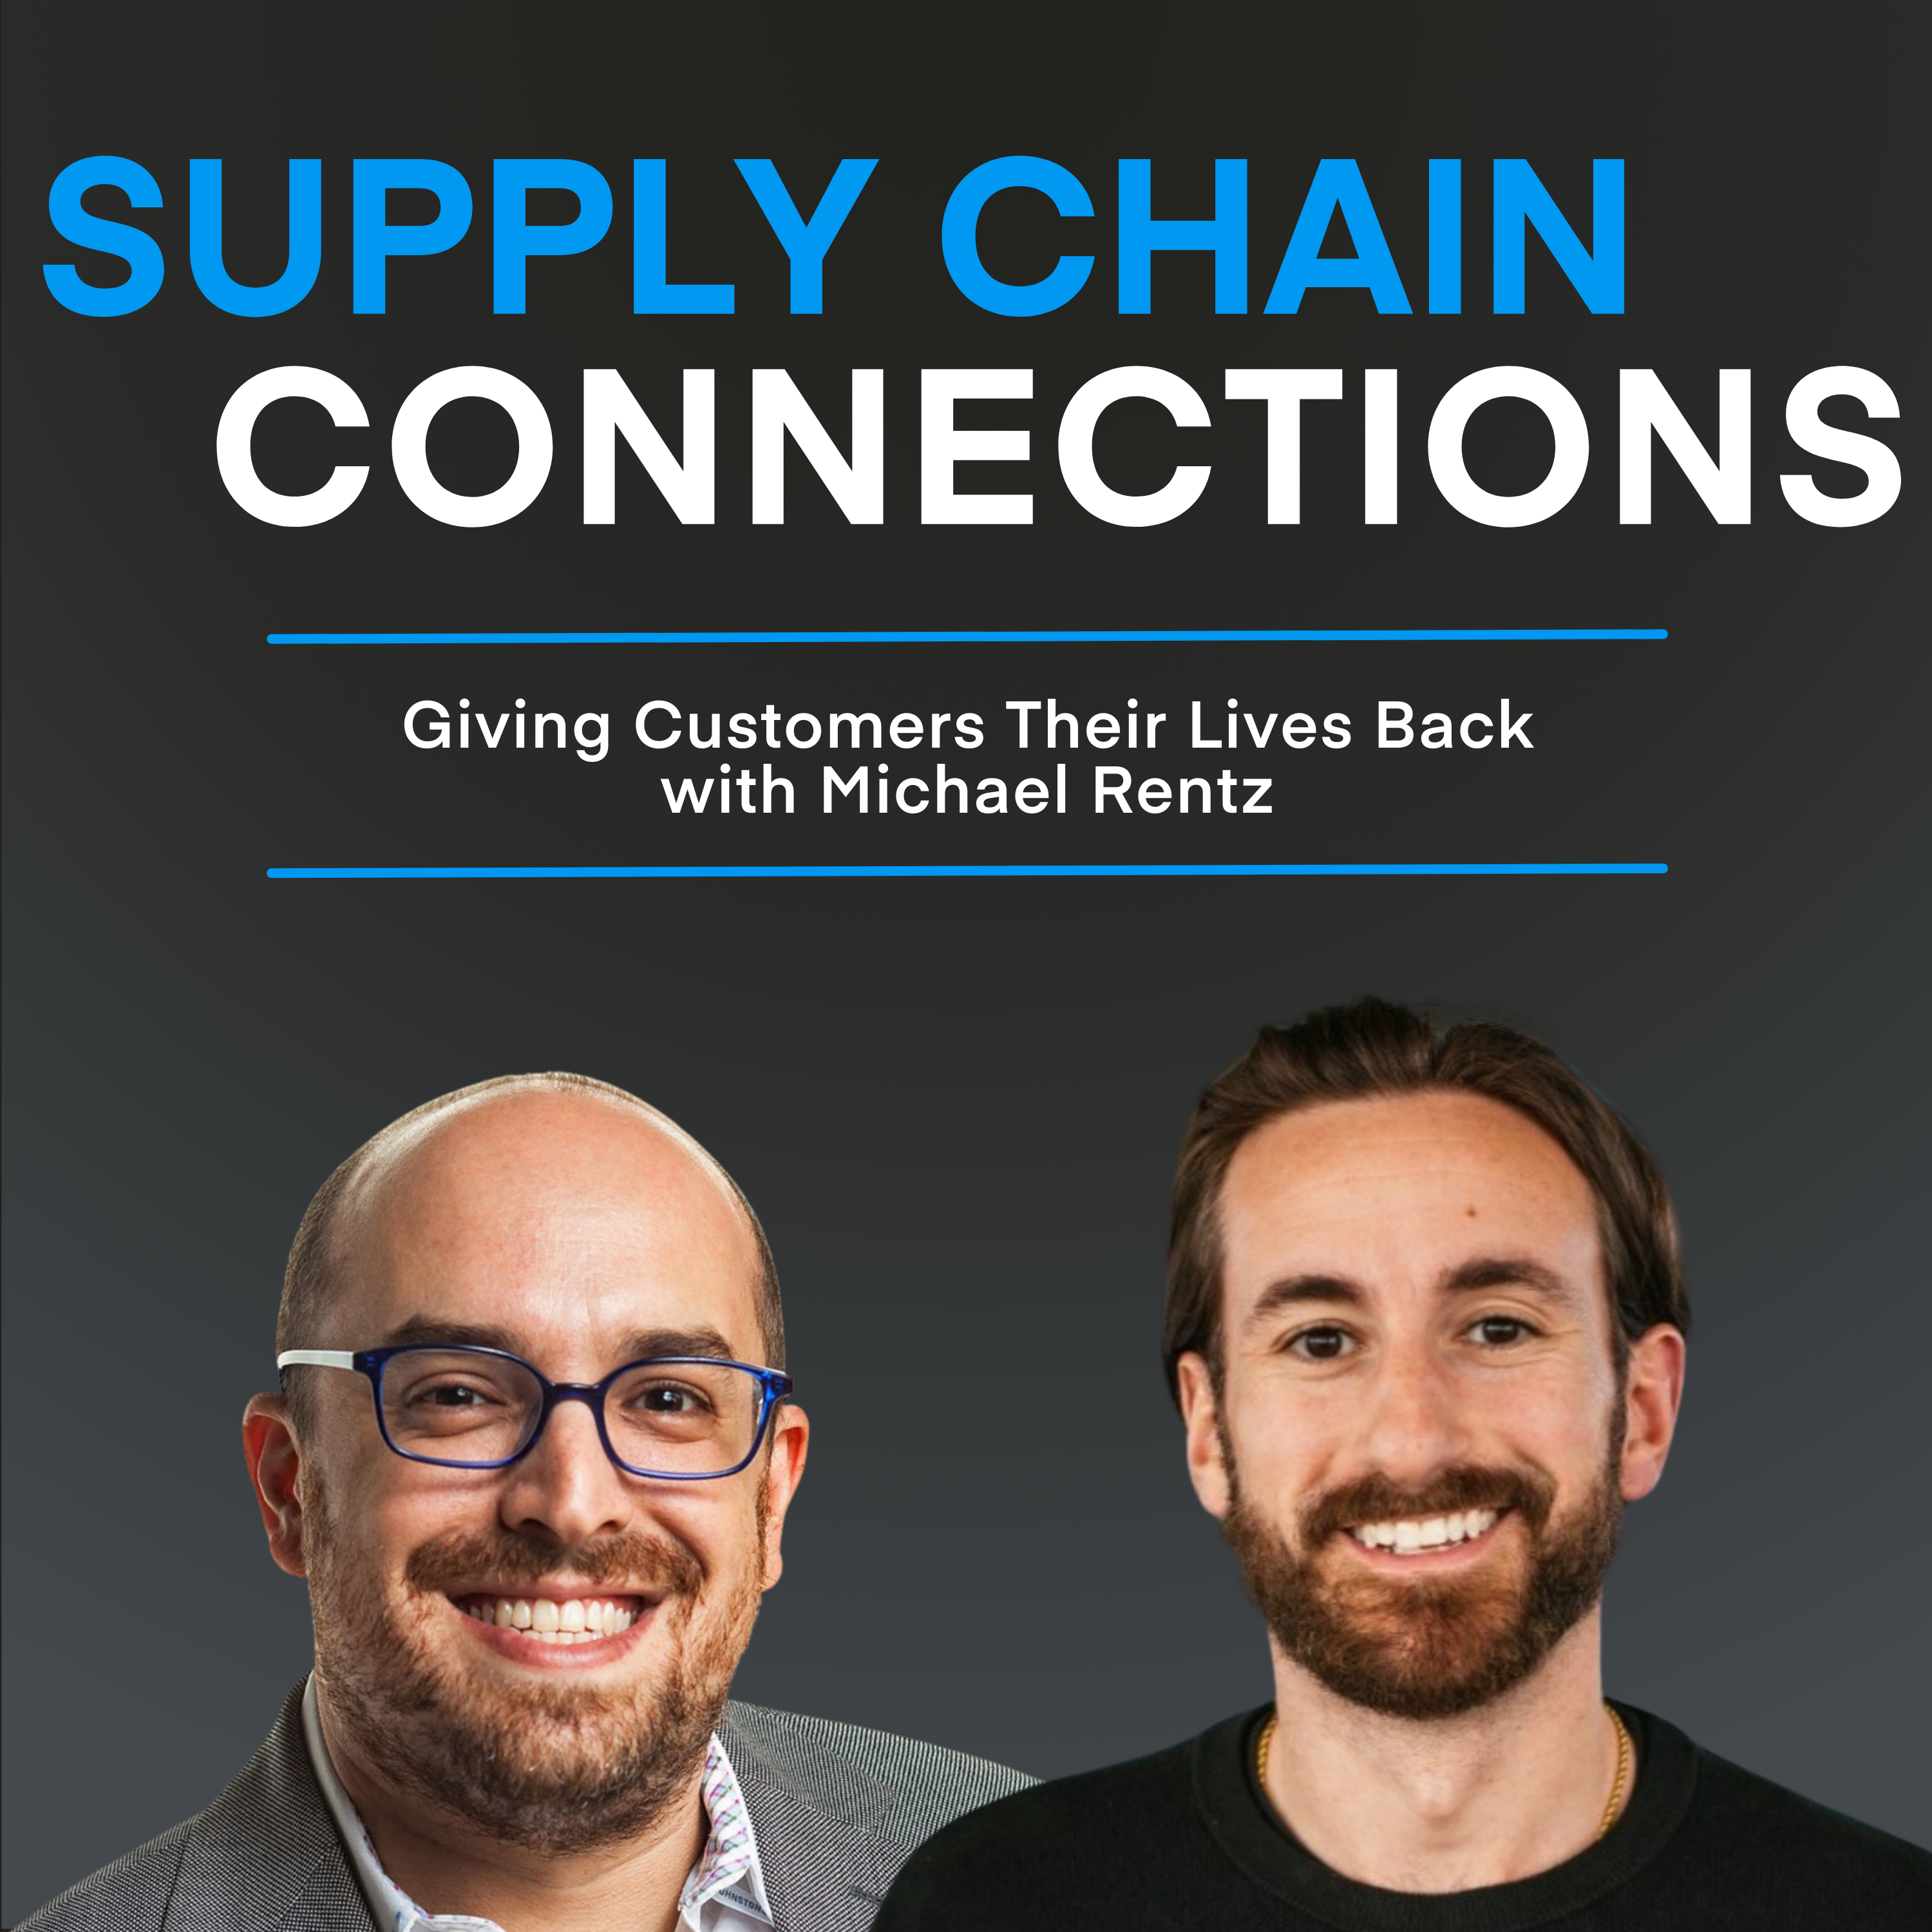 Giving Customers Their Lives Back with Michael Rentz